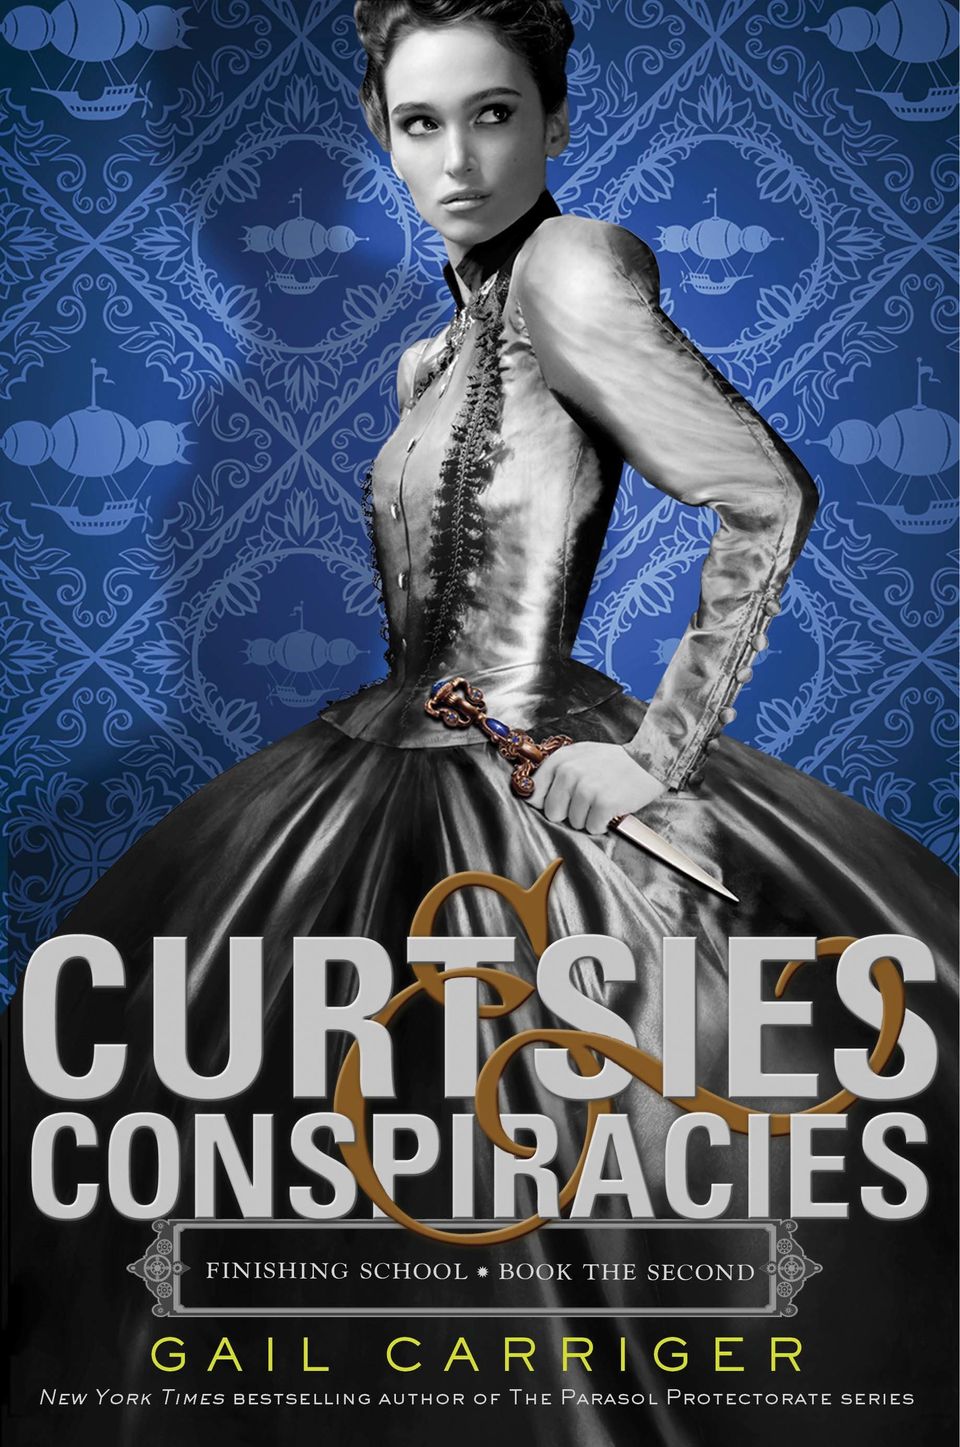 "Curtsies & Conspiracies" by Gail Carriger (Little, Brown)